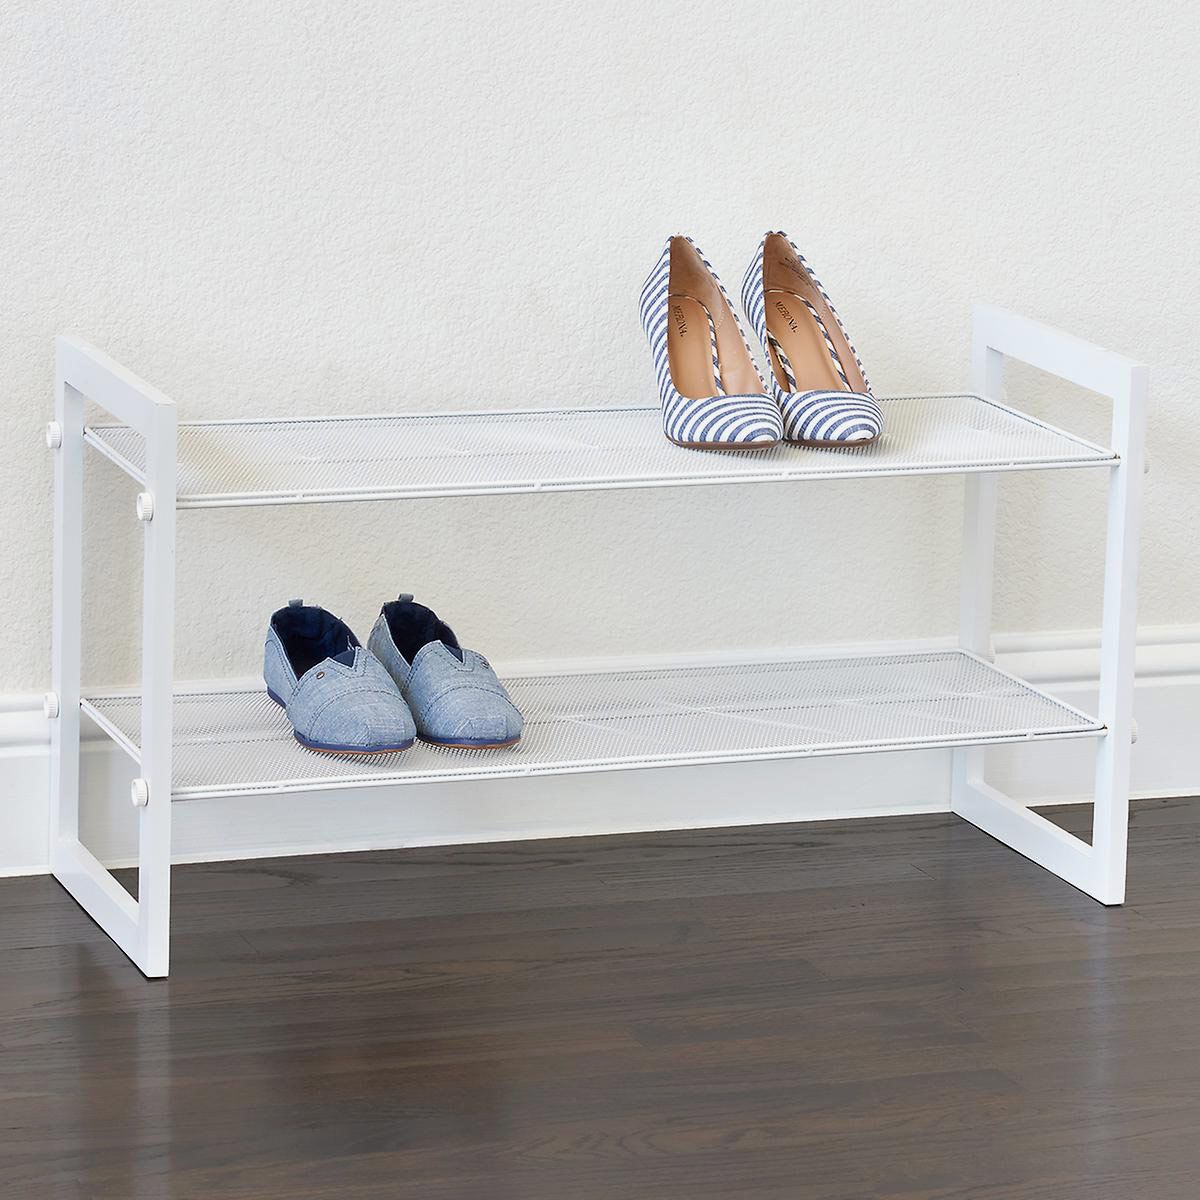 The Container Store White 2-Tier Stackable Mesh Shoe Shelf